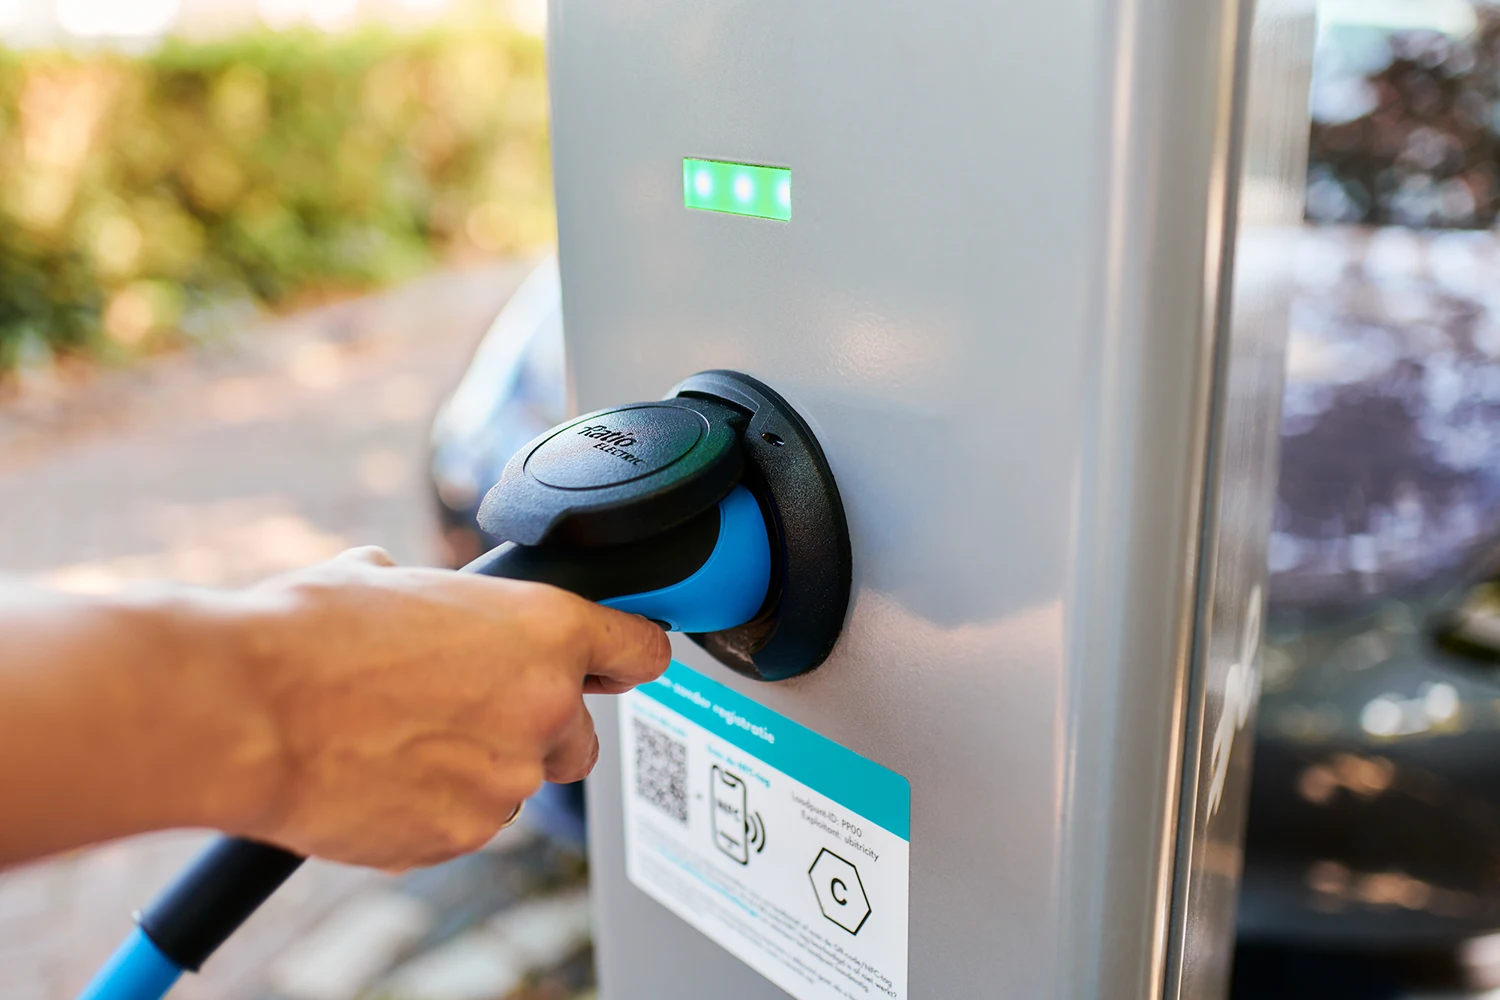 Thousands of new public charge points – Shell ubitricity further expands the EV charging infrastructure in three Dutch provinces